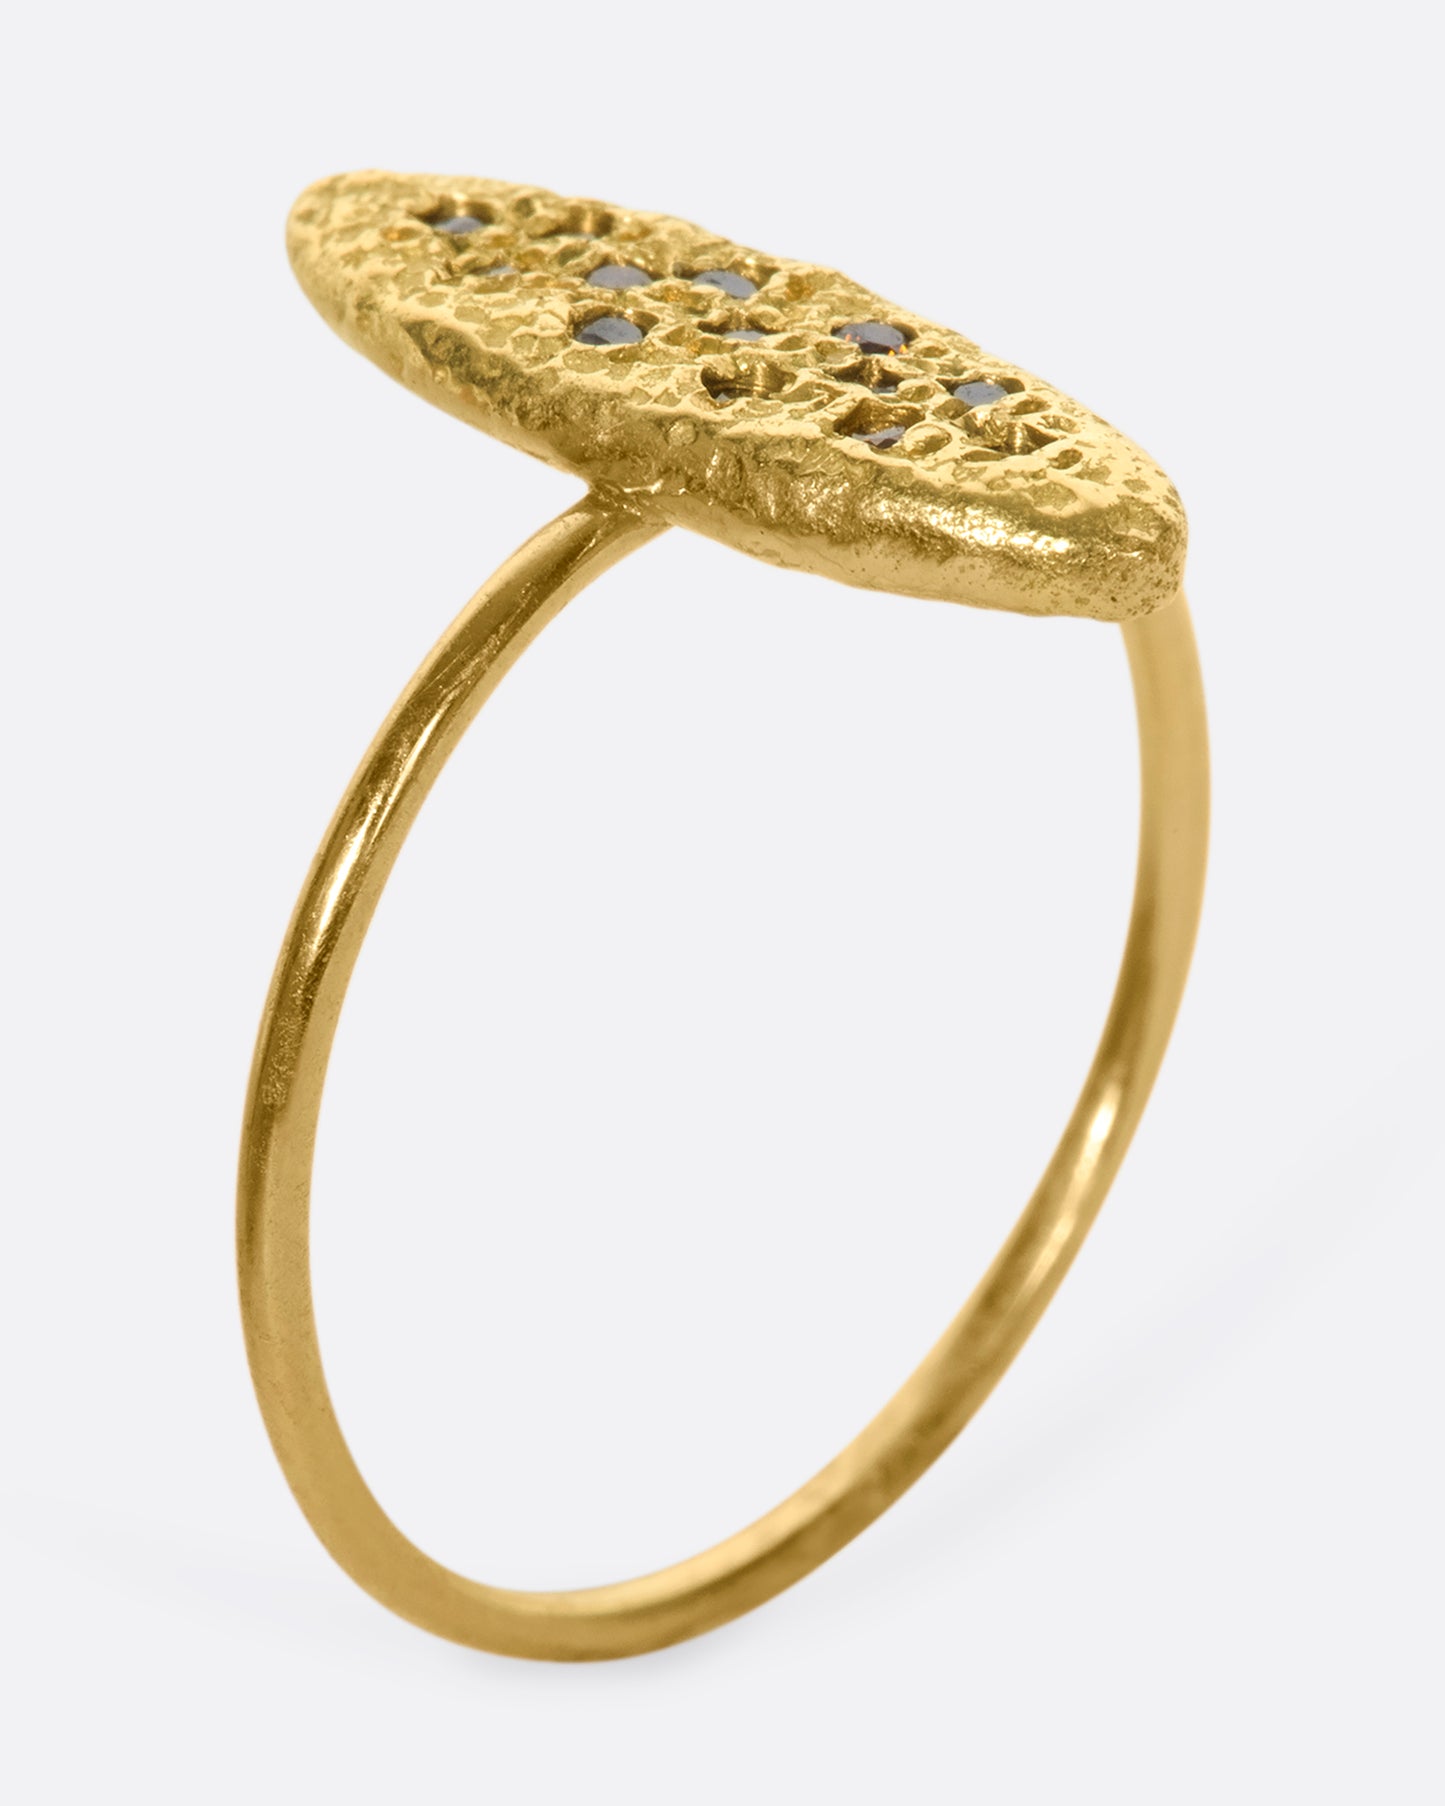 This 18k gold textured oval ring is dotted with vibrant, colorful diamonds